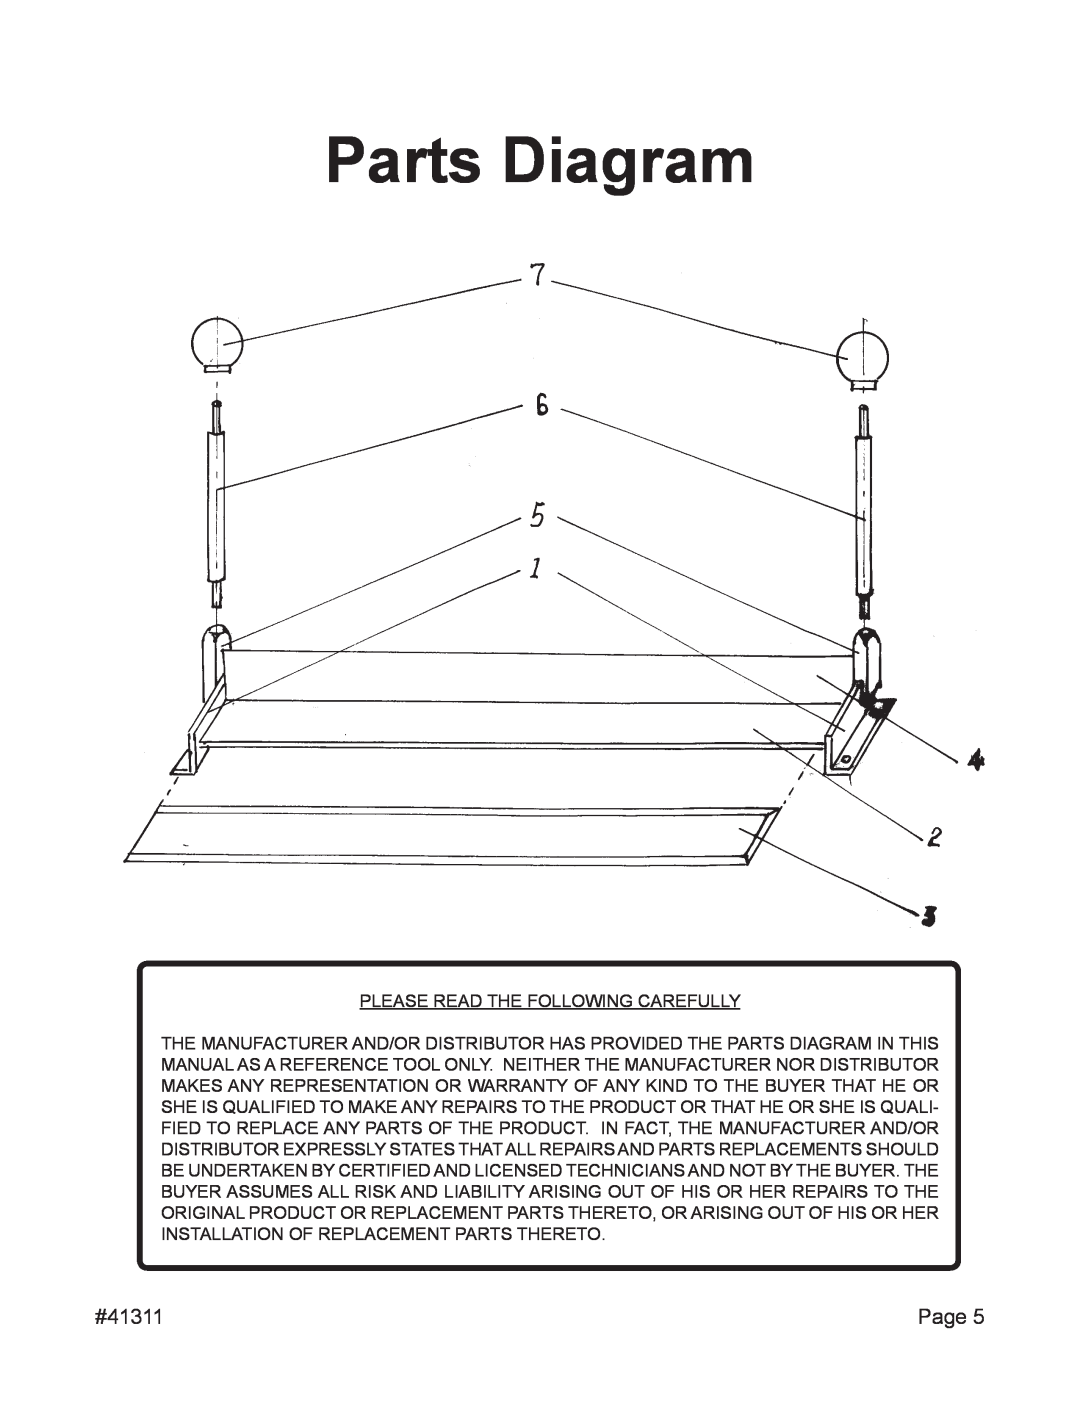 Harbor Freight Tools operating instructions Parts Diagram, #41311 